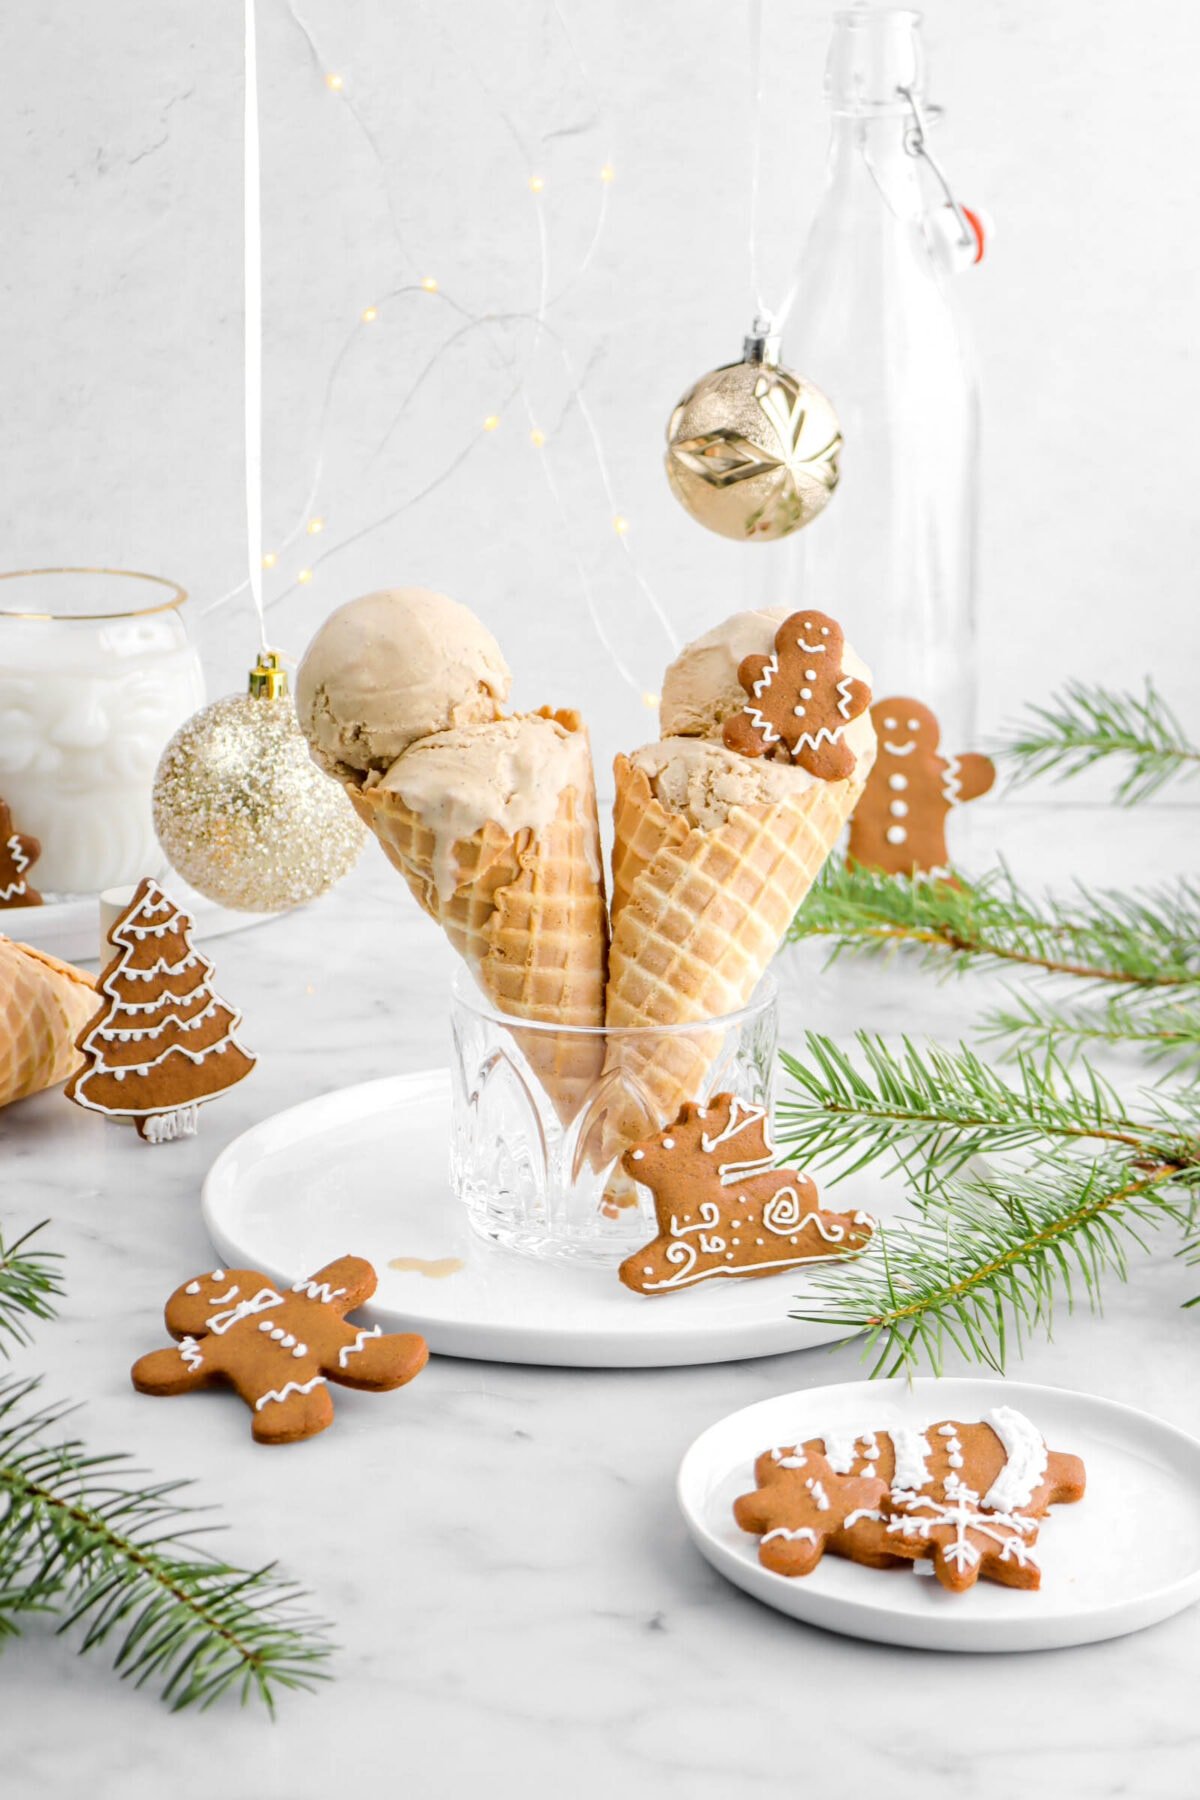 gingerbread ice cream in two waffle cones in a small glass on a white plate with cookies around, pine branches, two gold ornaments, and a glass of milk behind.